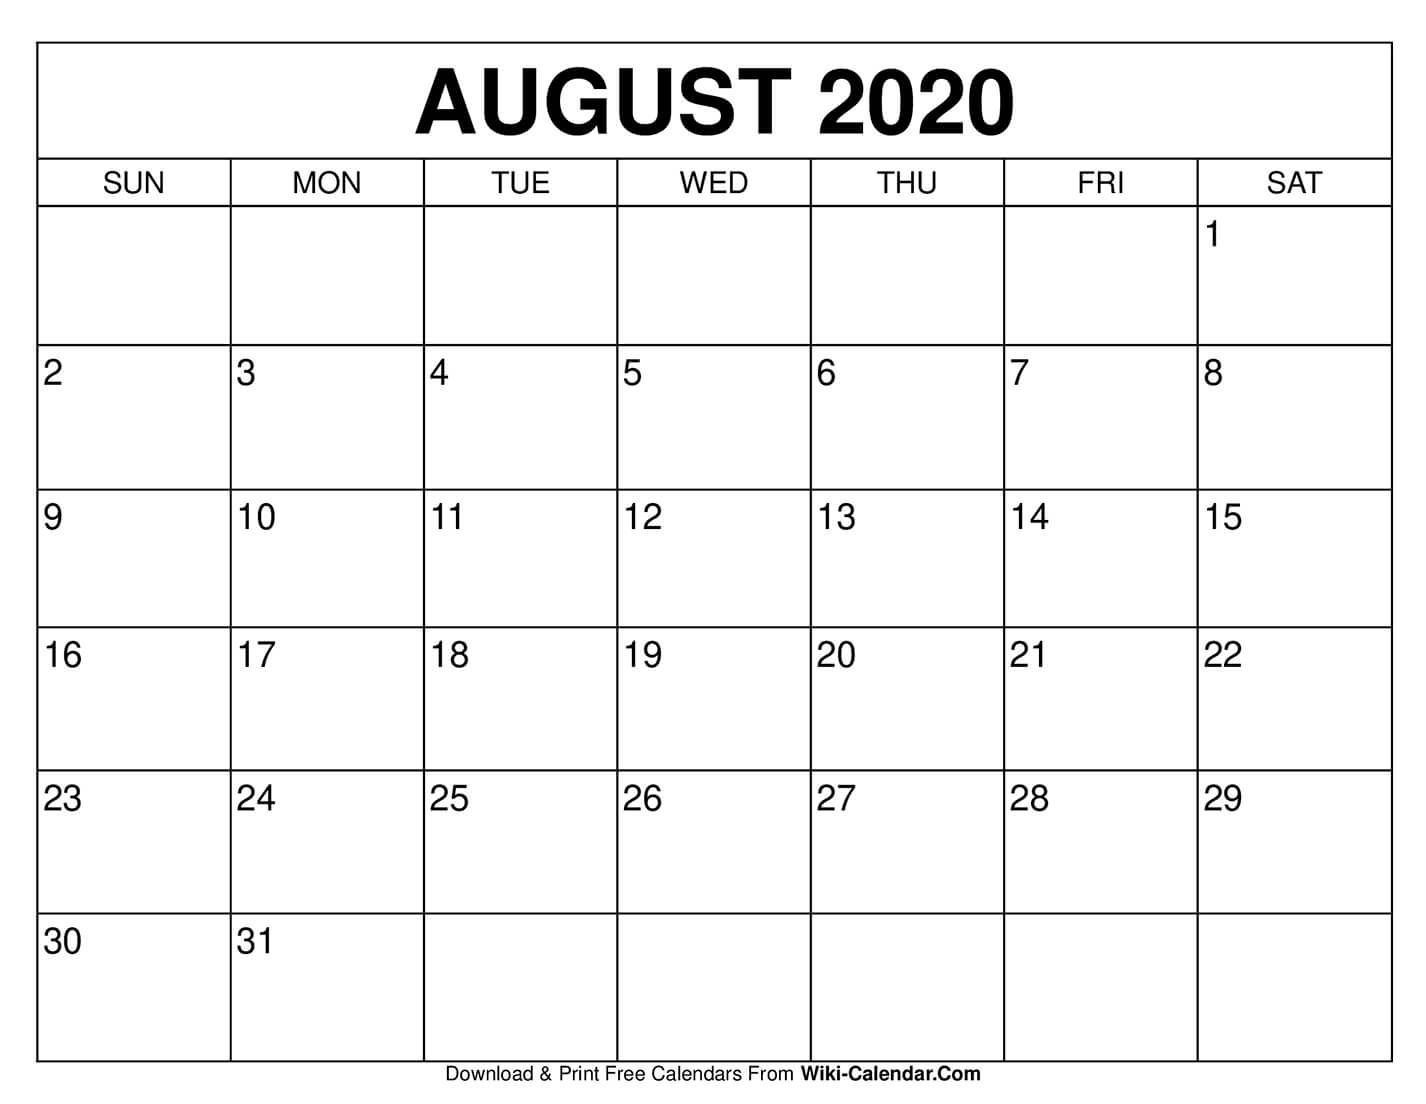 Get Calendar To Print August To Print